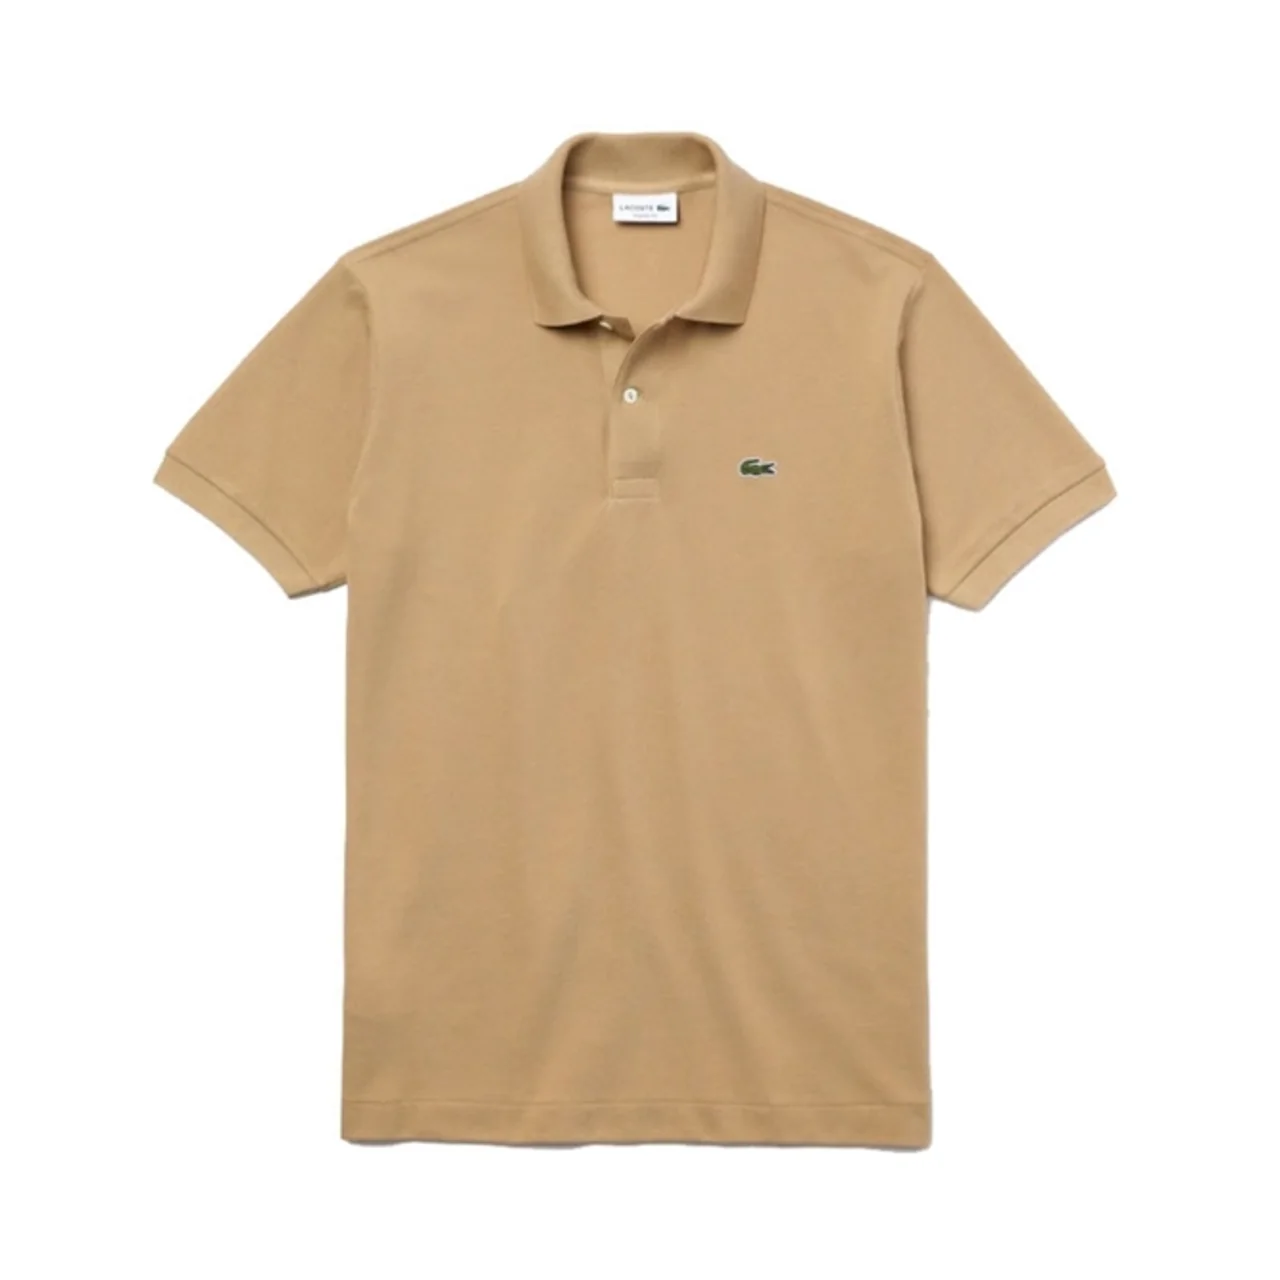 Lacoste Classic Fit Polo Beige